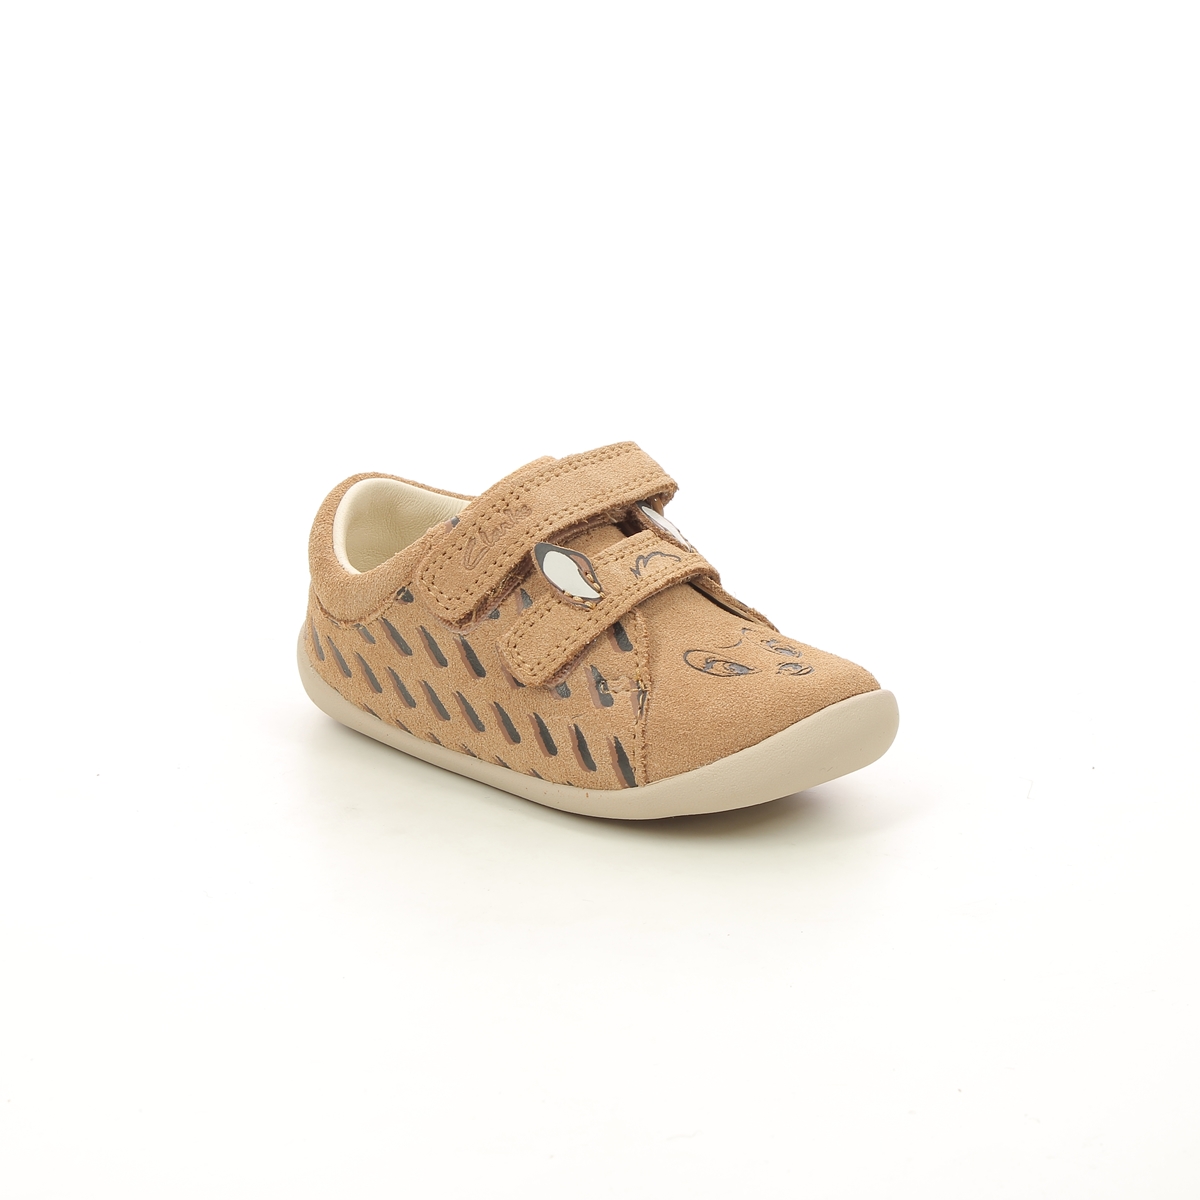 Clarks Roamer Deer T Tan suede Kids girls first and baby shoes 6213-76F in a Plain Leather in Size 5